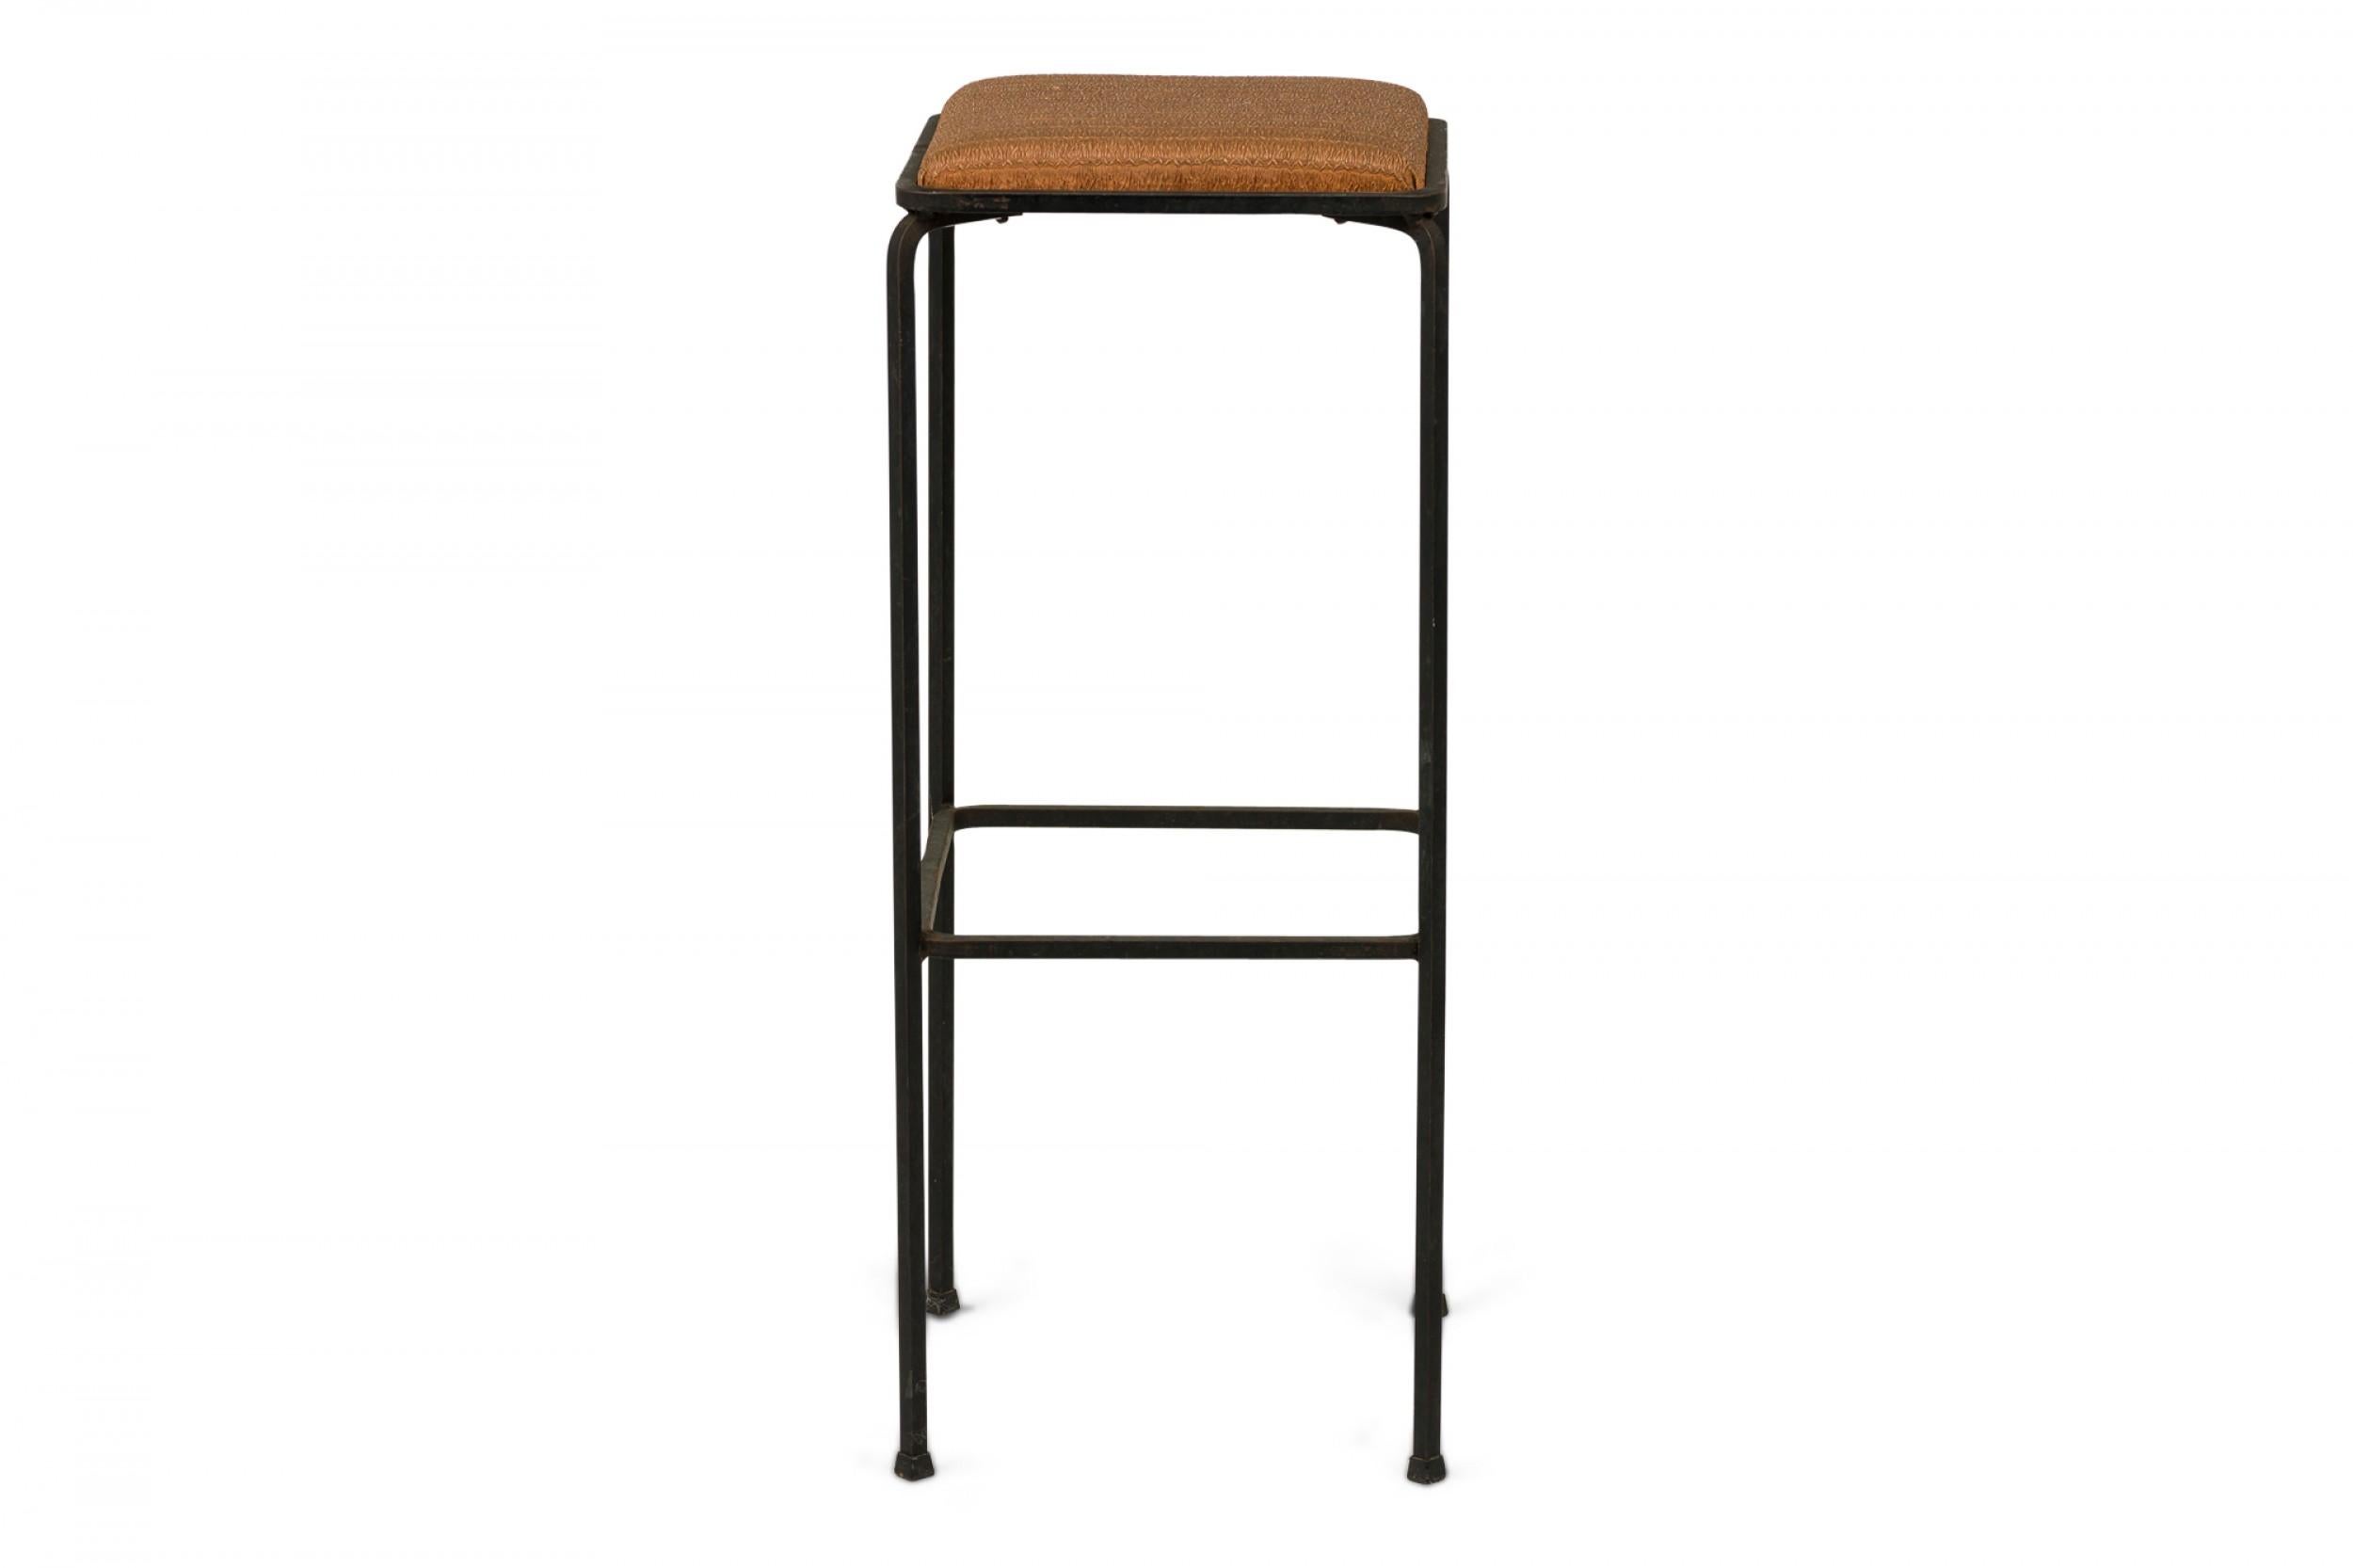 Set of 4 Midcentury Italian Square Wrought Iron Frame Bar Stools In Good Condition For Sale In New York, NY